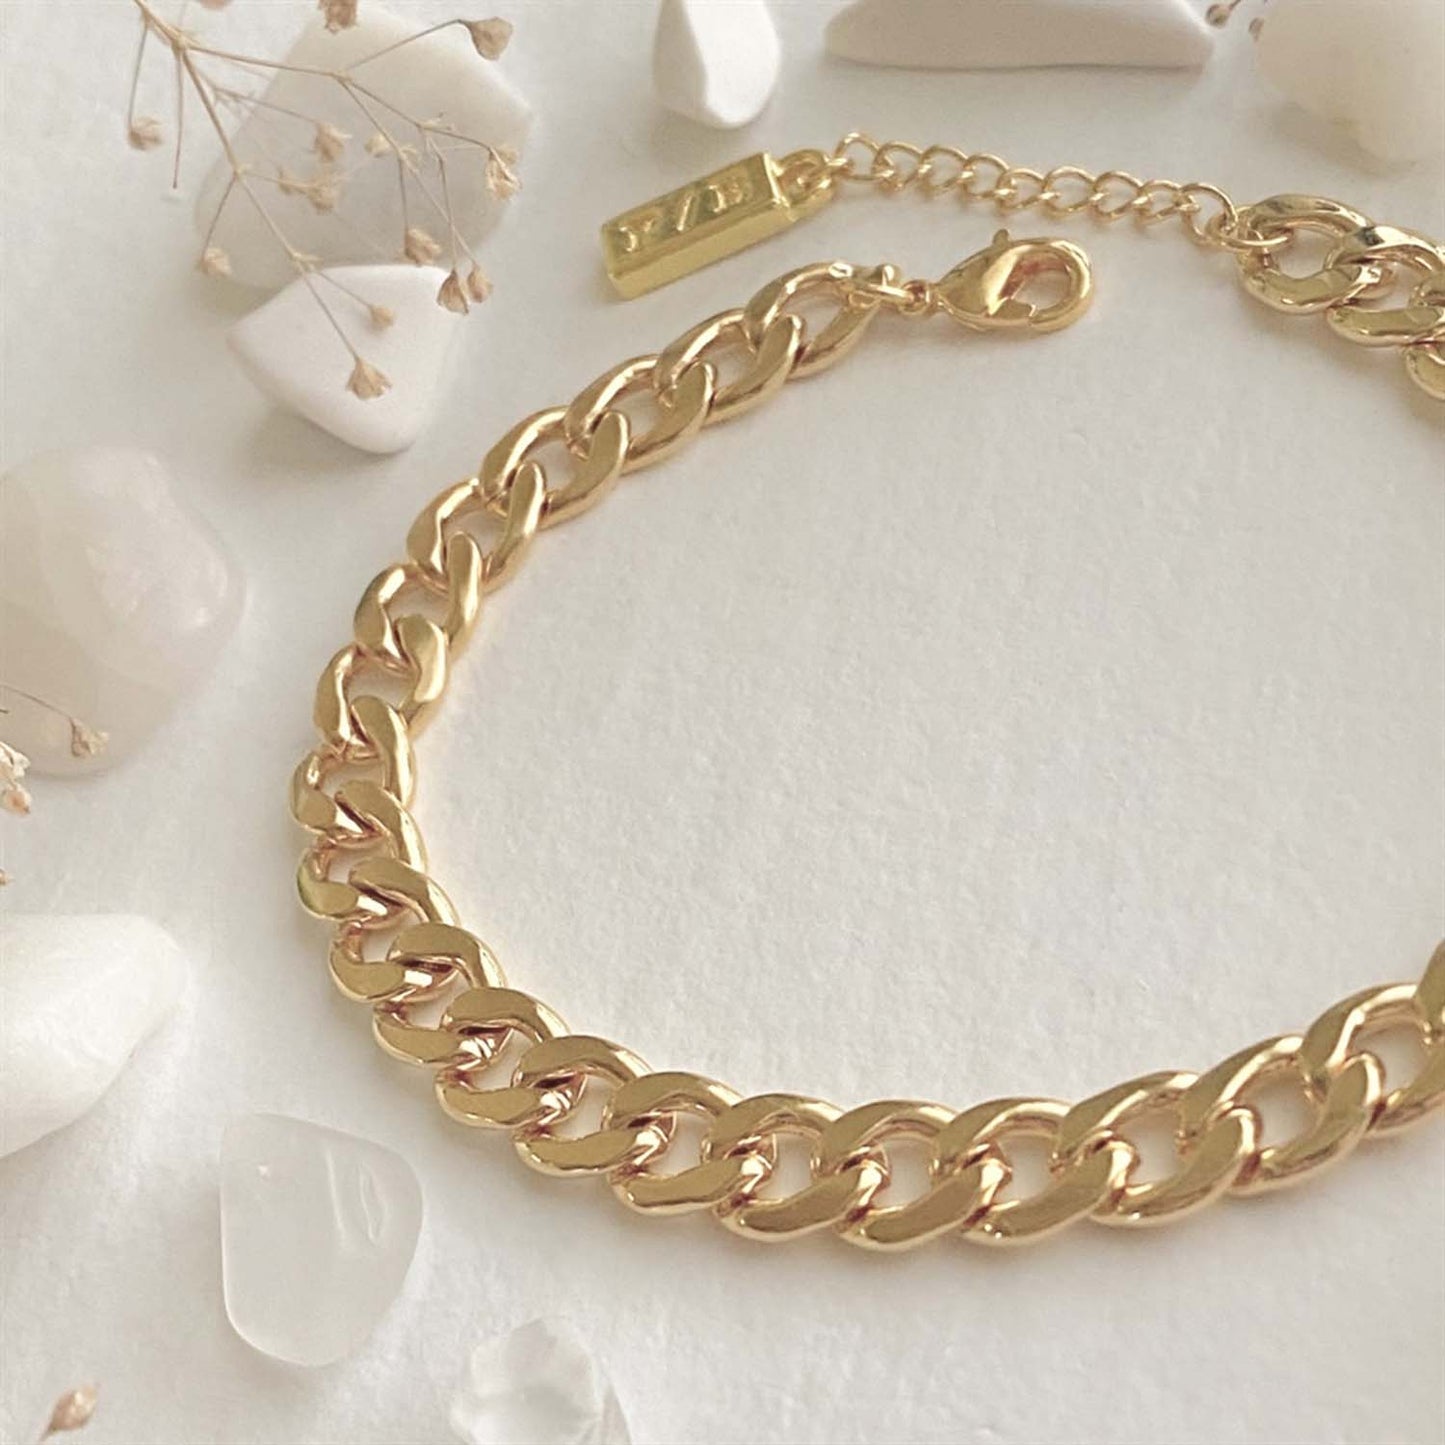 Billy Large Link Chain Bracelet in Gold